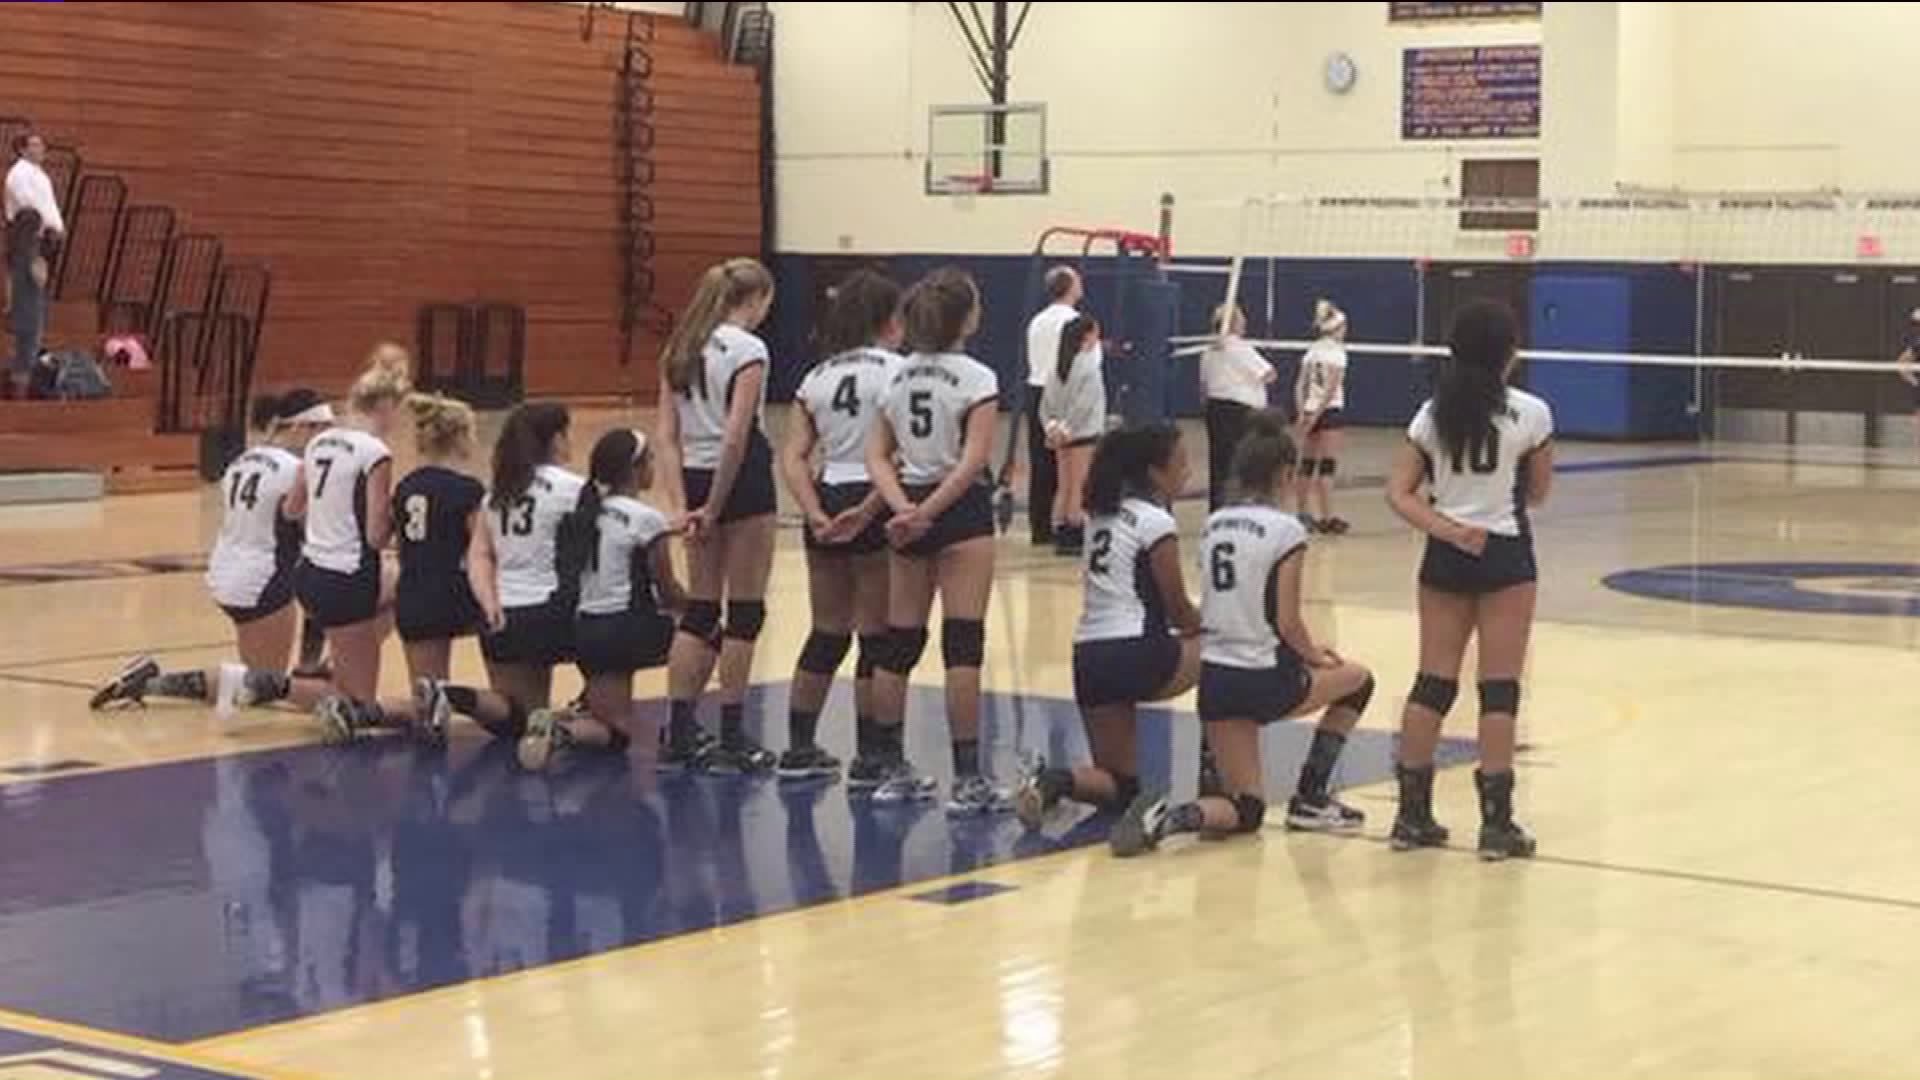 Volleyball team takes a knee during National Anthem